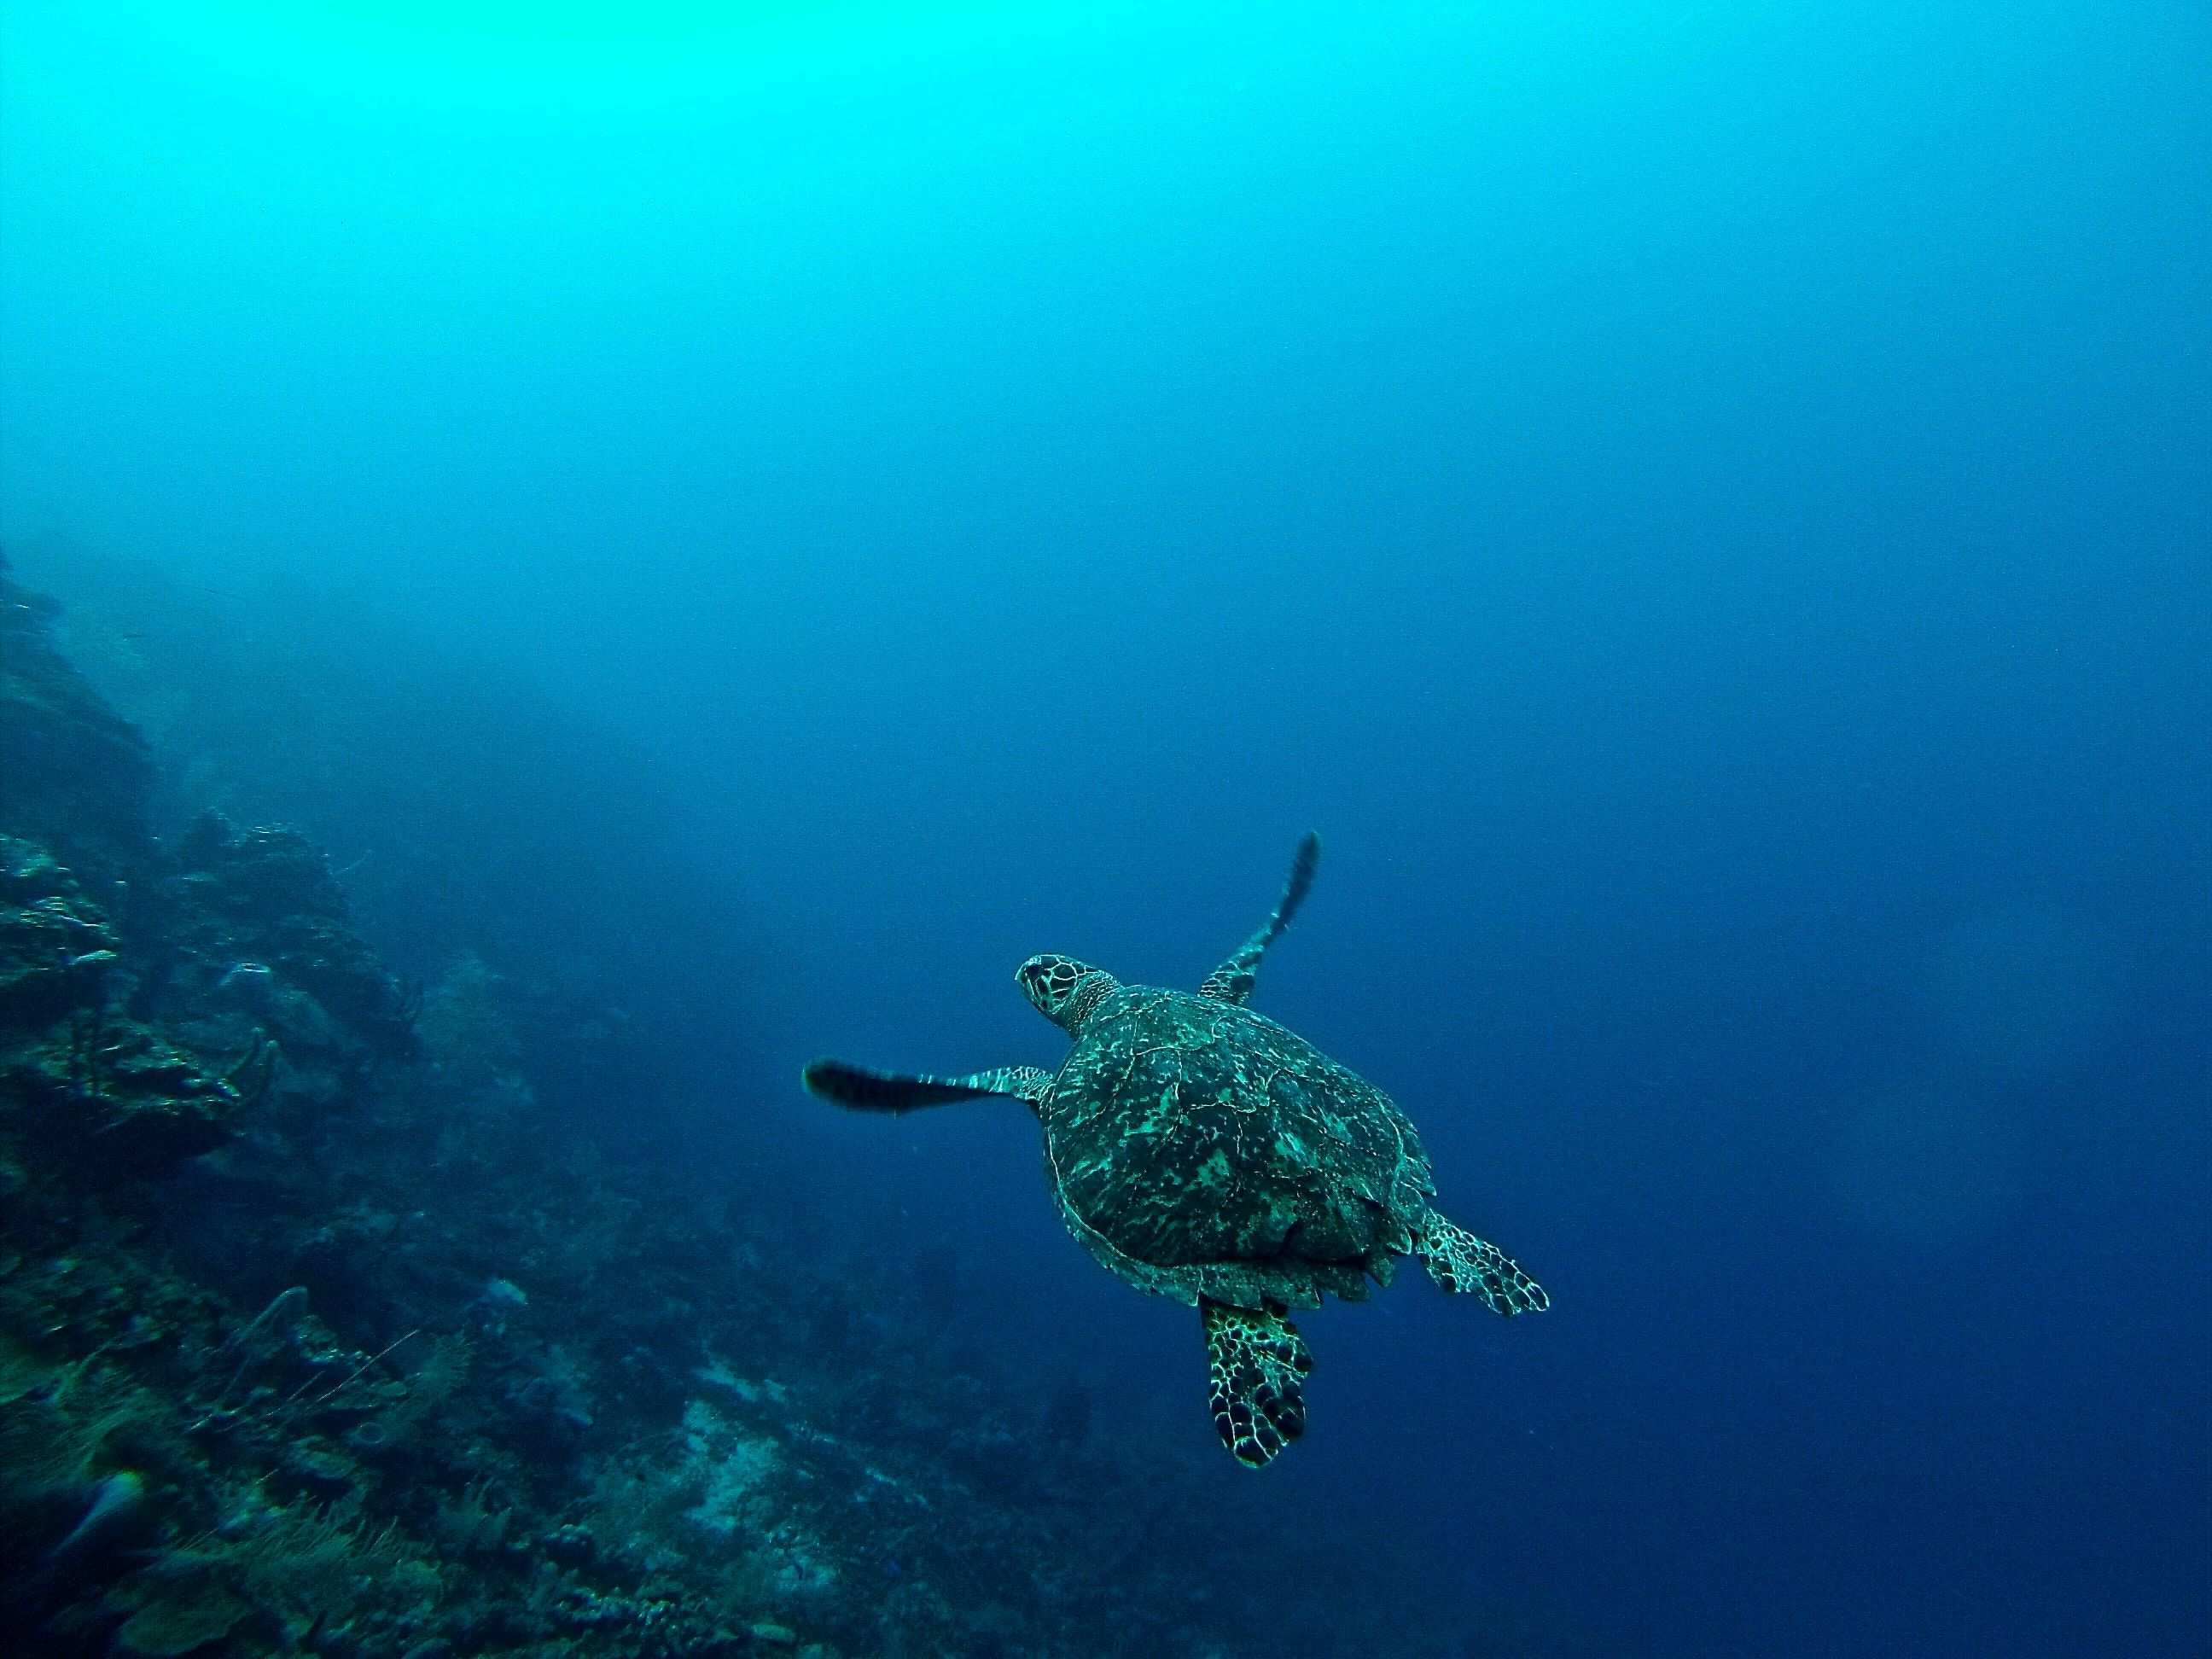 A turtle in the ocean